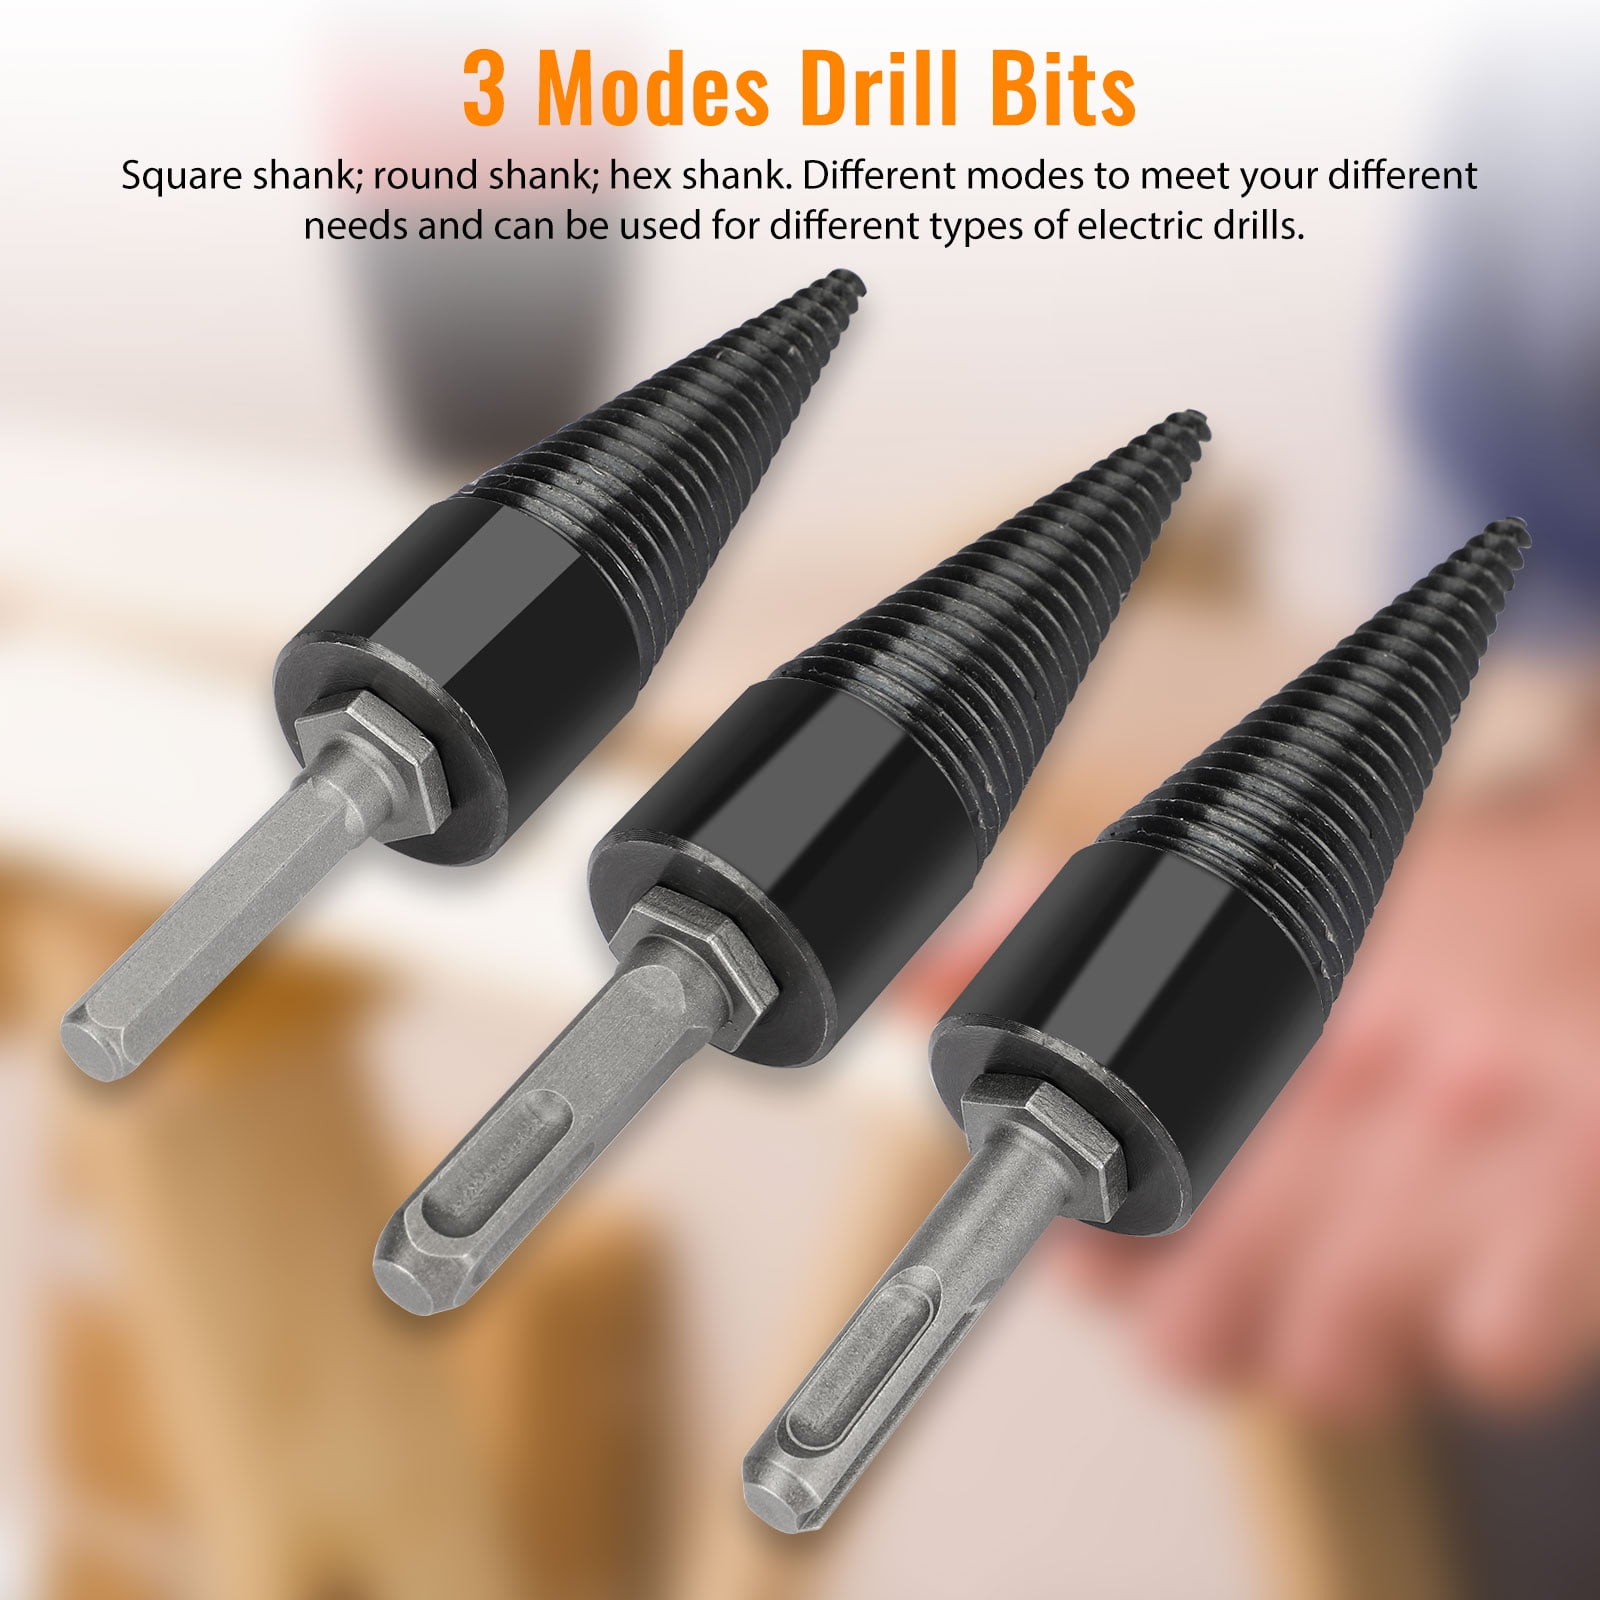 Bits and Accessories - Power Tools and Accessories - MRO Supplies - Armour Piercing  Taper Shank Drill, 9/32 Letter/Wire, 0.2812 in dia, 5-5/16 in lg